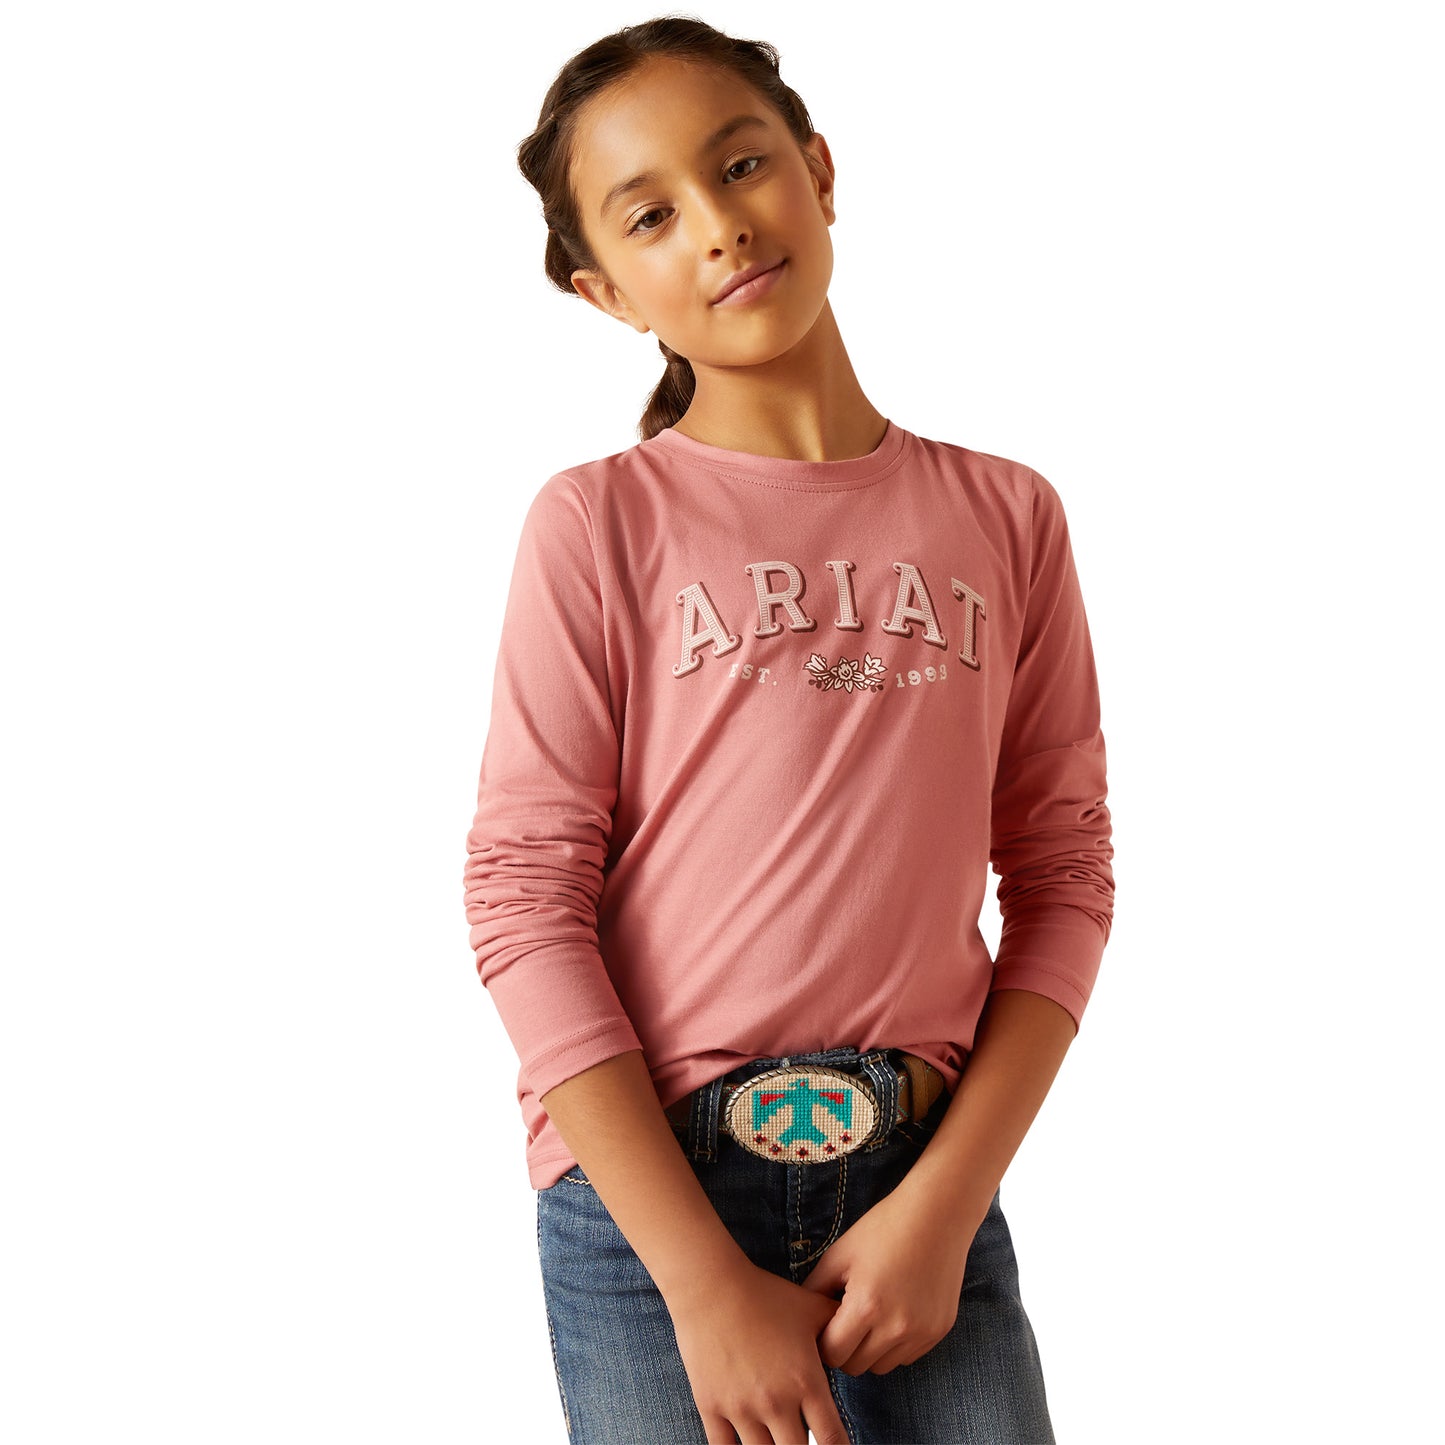 Ariat Youth Girl's Flora Dusty Rose Long Sleeve T-Shirt 10046461